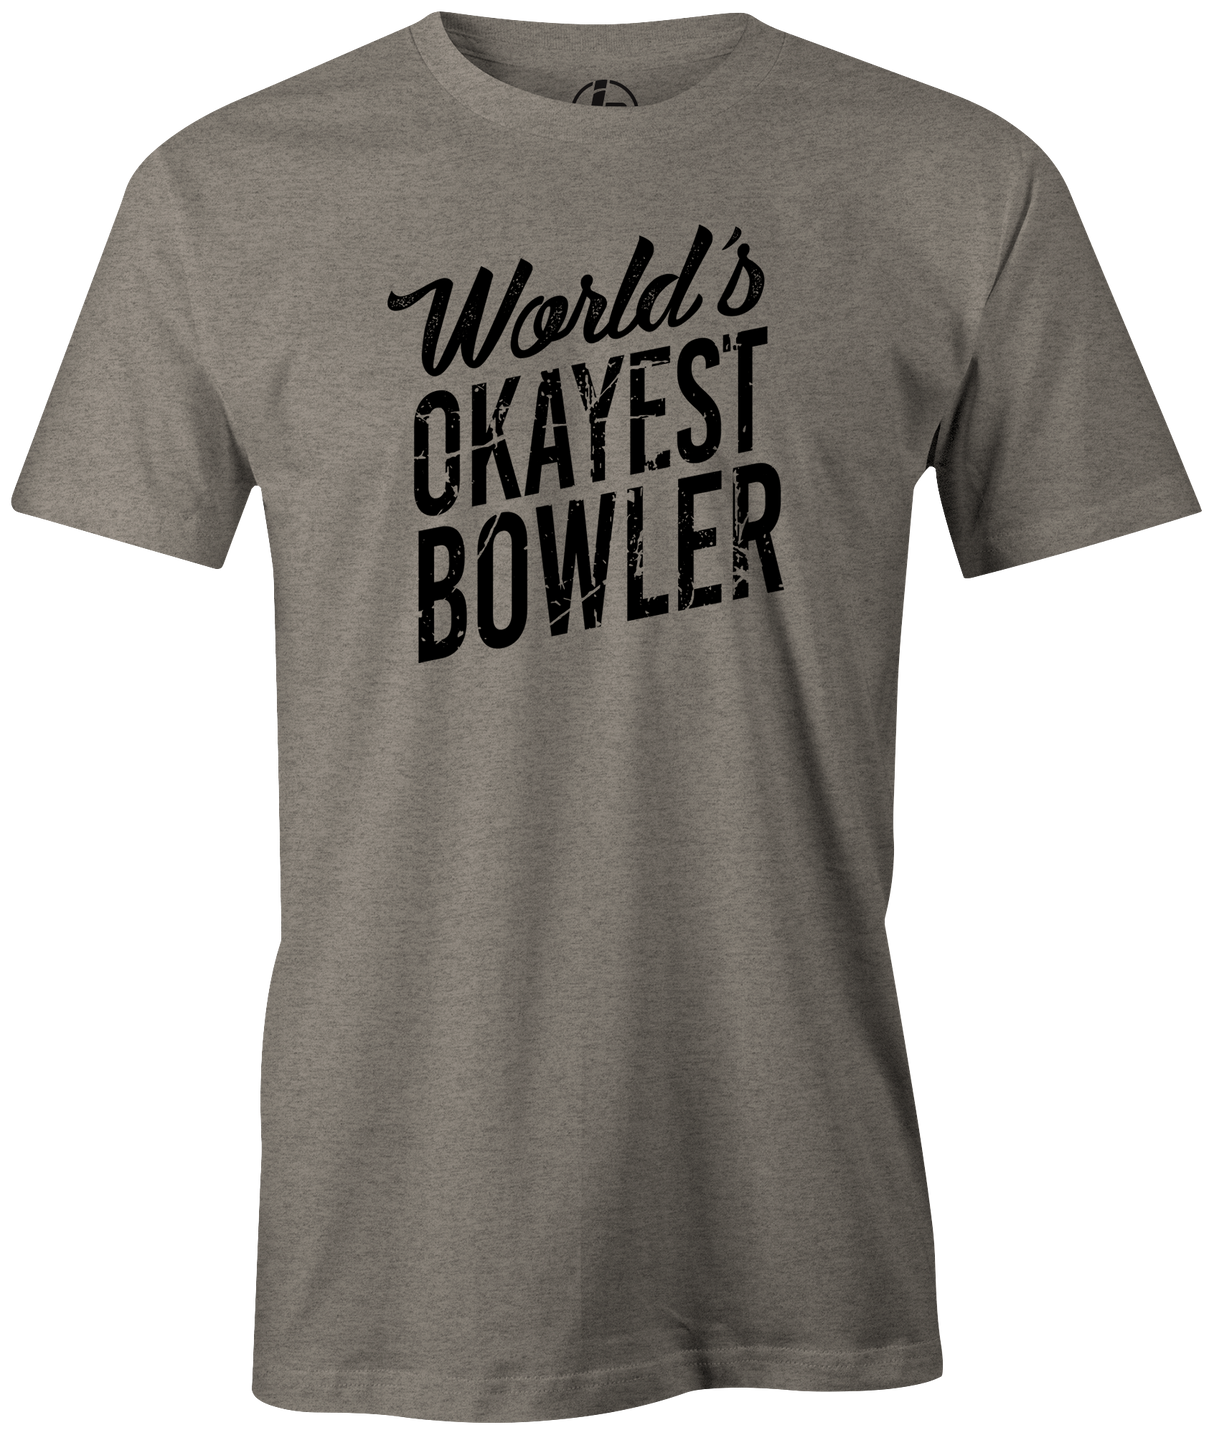 Get your humor on with this fun tee. Hit the lanes and letting everyone know your skills before you even throw a shot...or does it?!  Bowling, Tshirt, gift, funny, free, novelty, golf, shirt, tshirt, tee, shirt, pba, pwba, pro bowling, league bowling, league night, strike, spare, gutter, gray grey